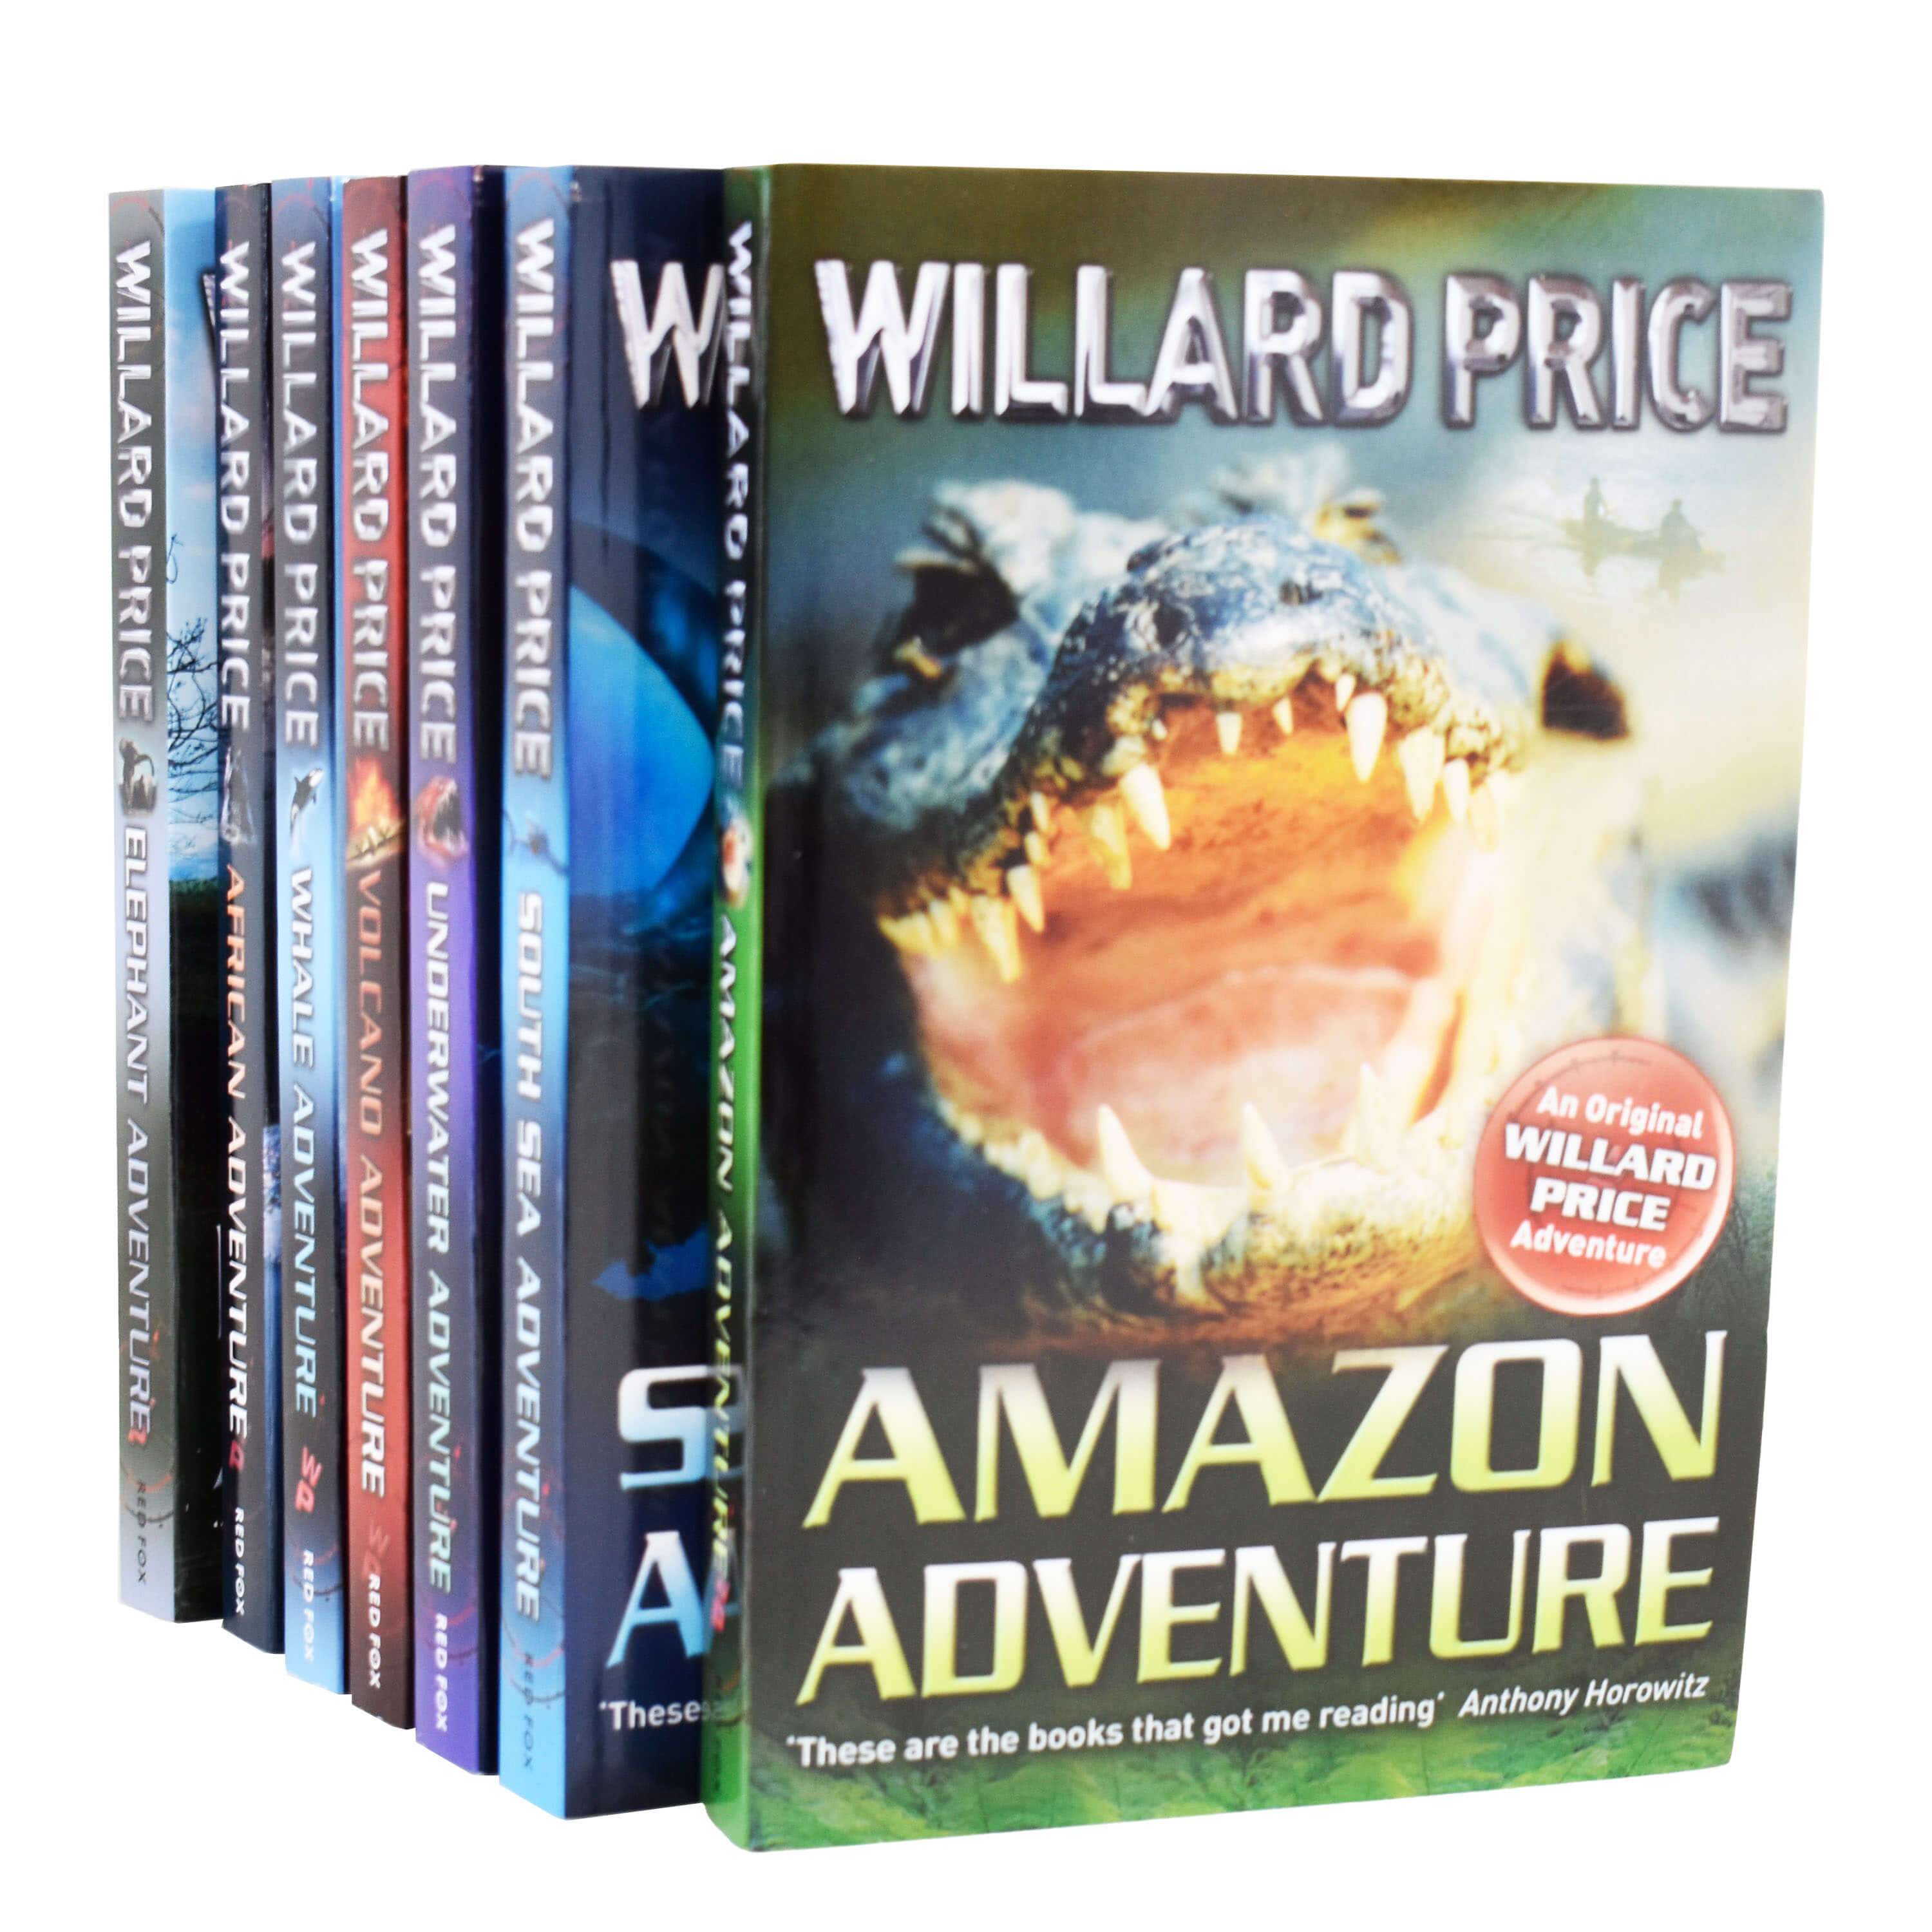 Hal & Roger Hunt Adventures Series 7 Books Collection Set by Willard Price